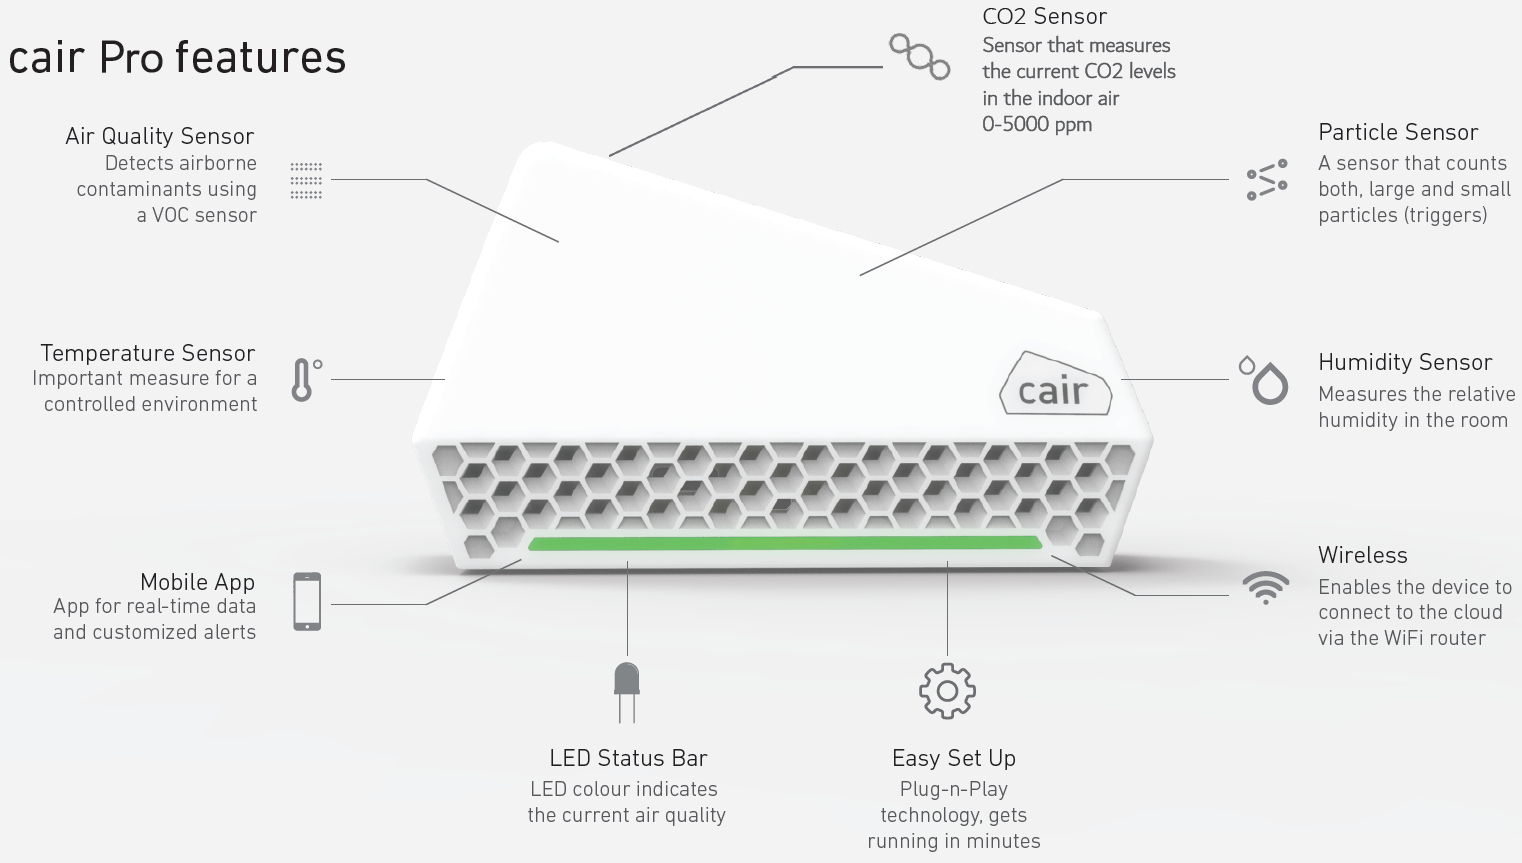 NUWAVE Cair - The Smart Air Quality Monitor